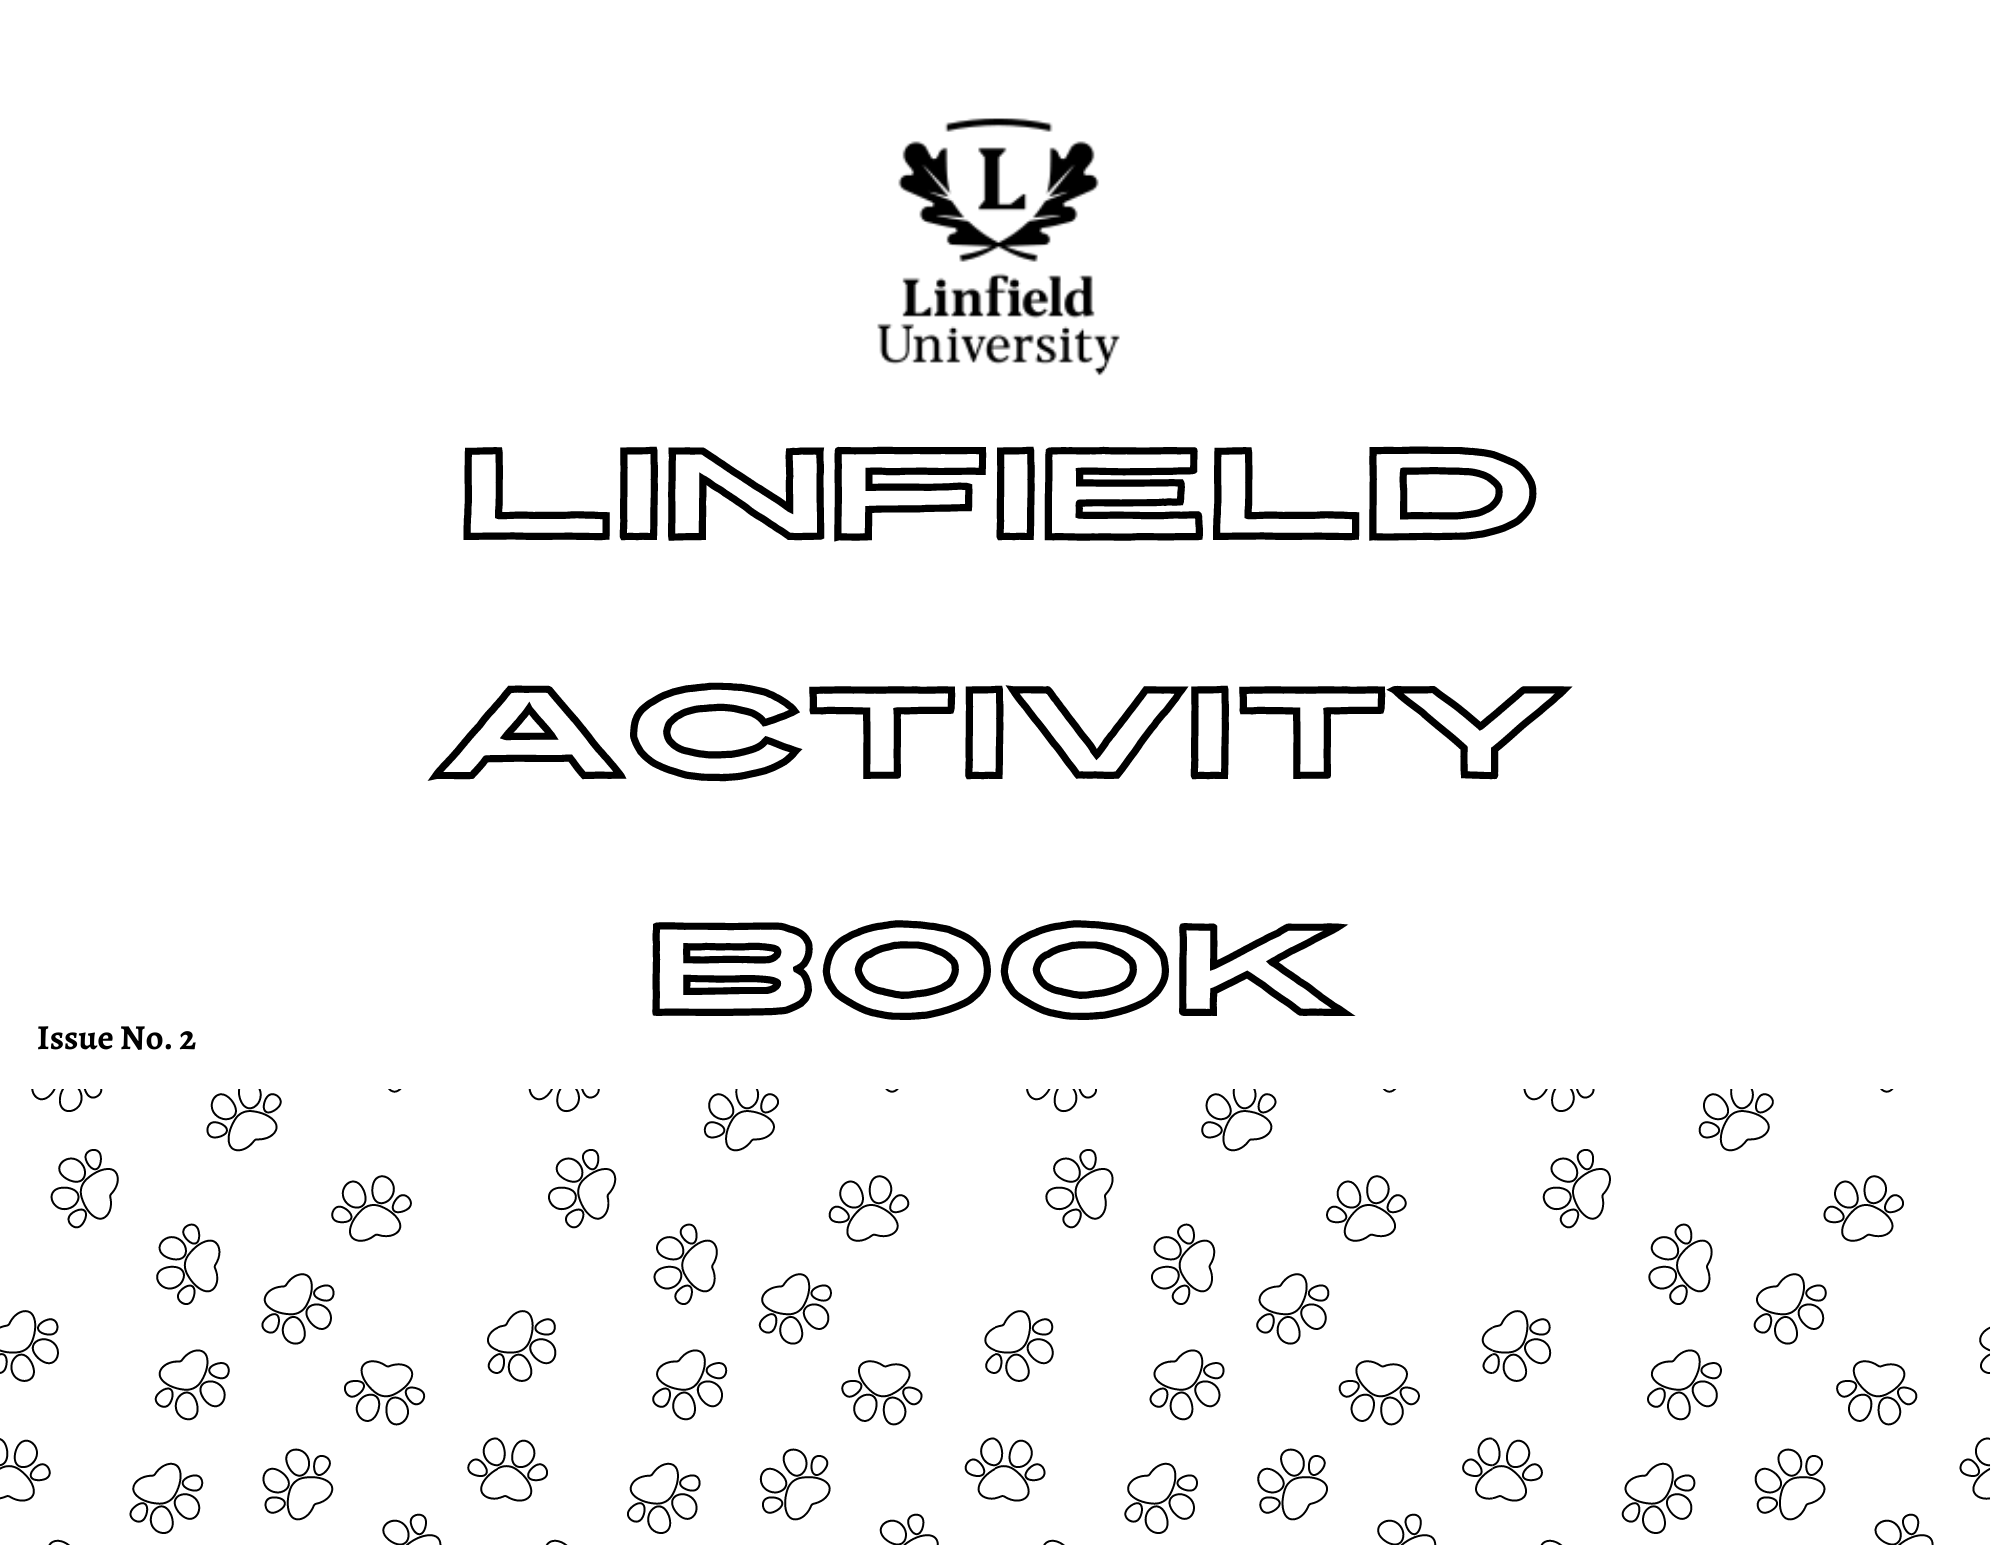 Coloring page of issue number 2 of The Linfield Activity Book